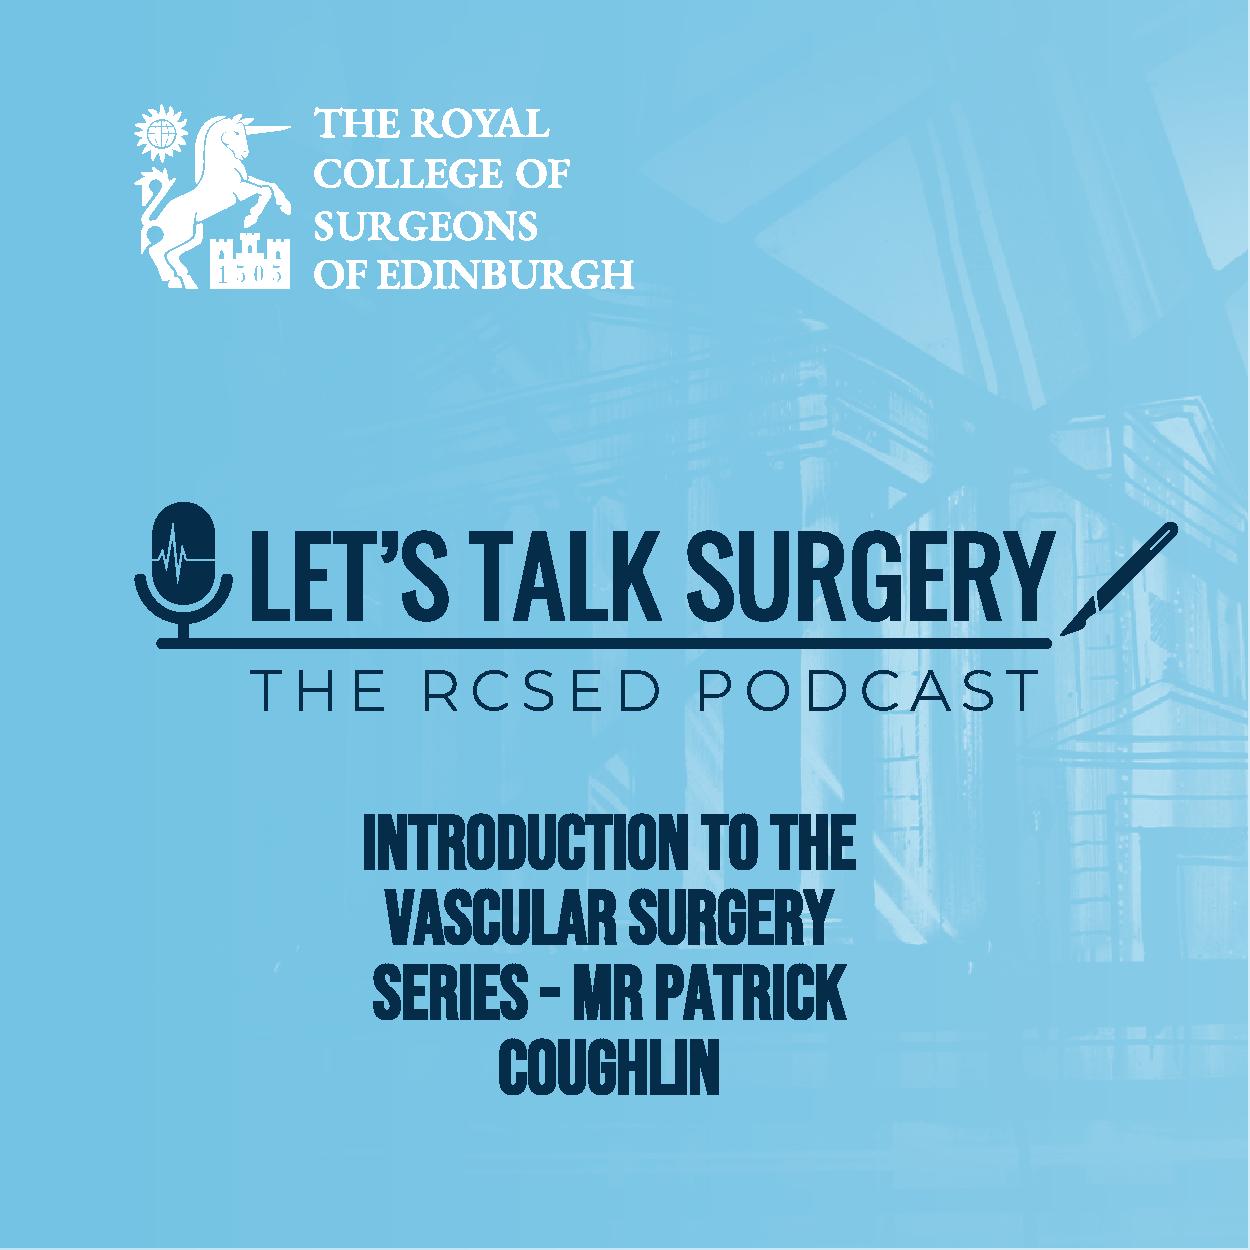 Episode #28: "Introduction to the Vascular Surgery Series - Mr Patrick Coughlin"